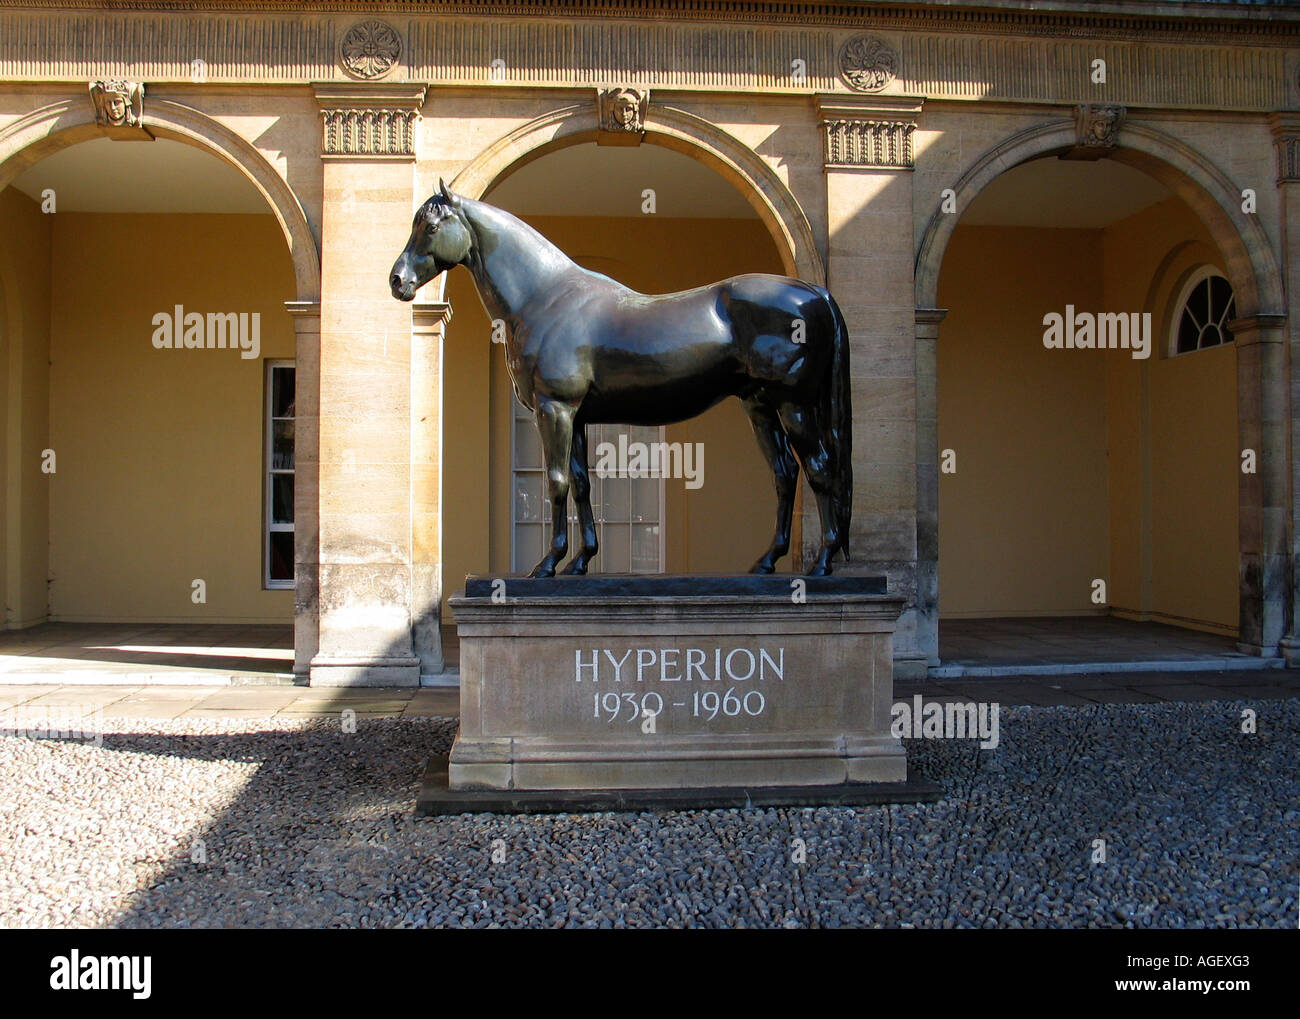 Statue of racehorse Hyperion in Newmarket UK Stock Photo